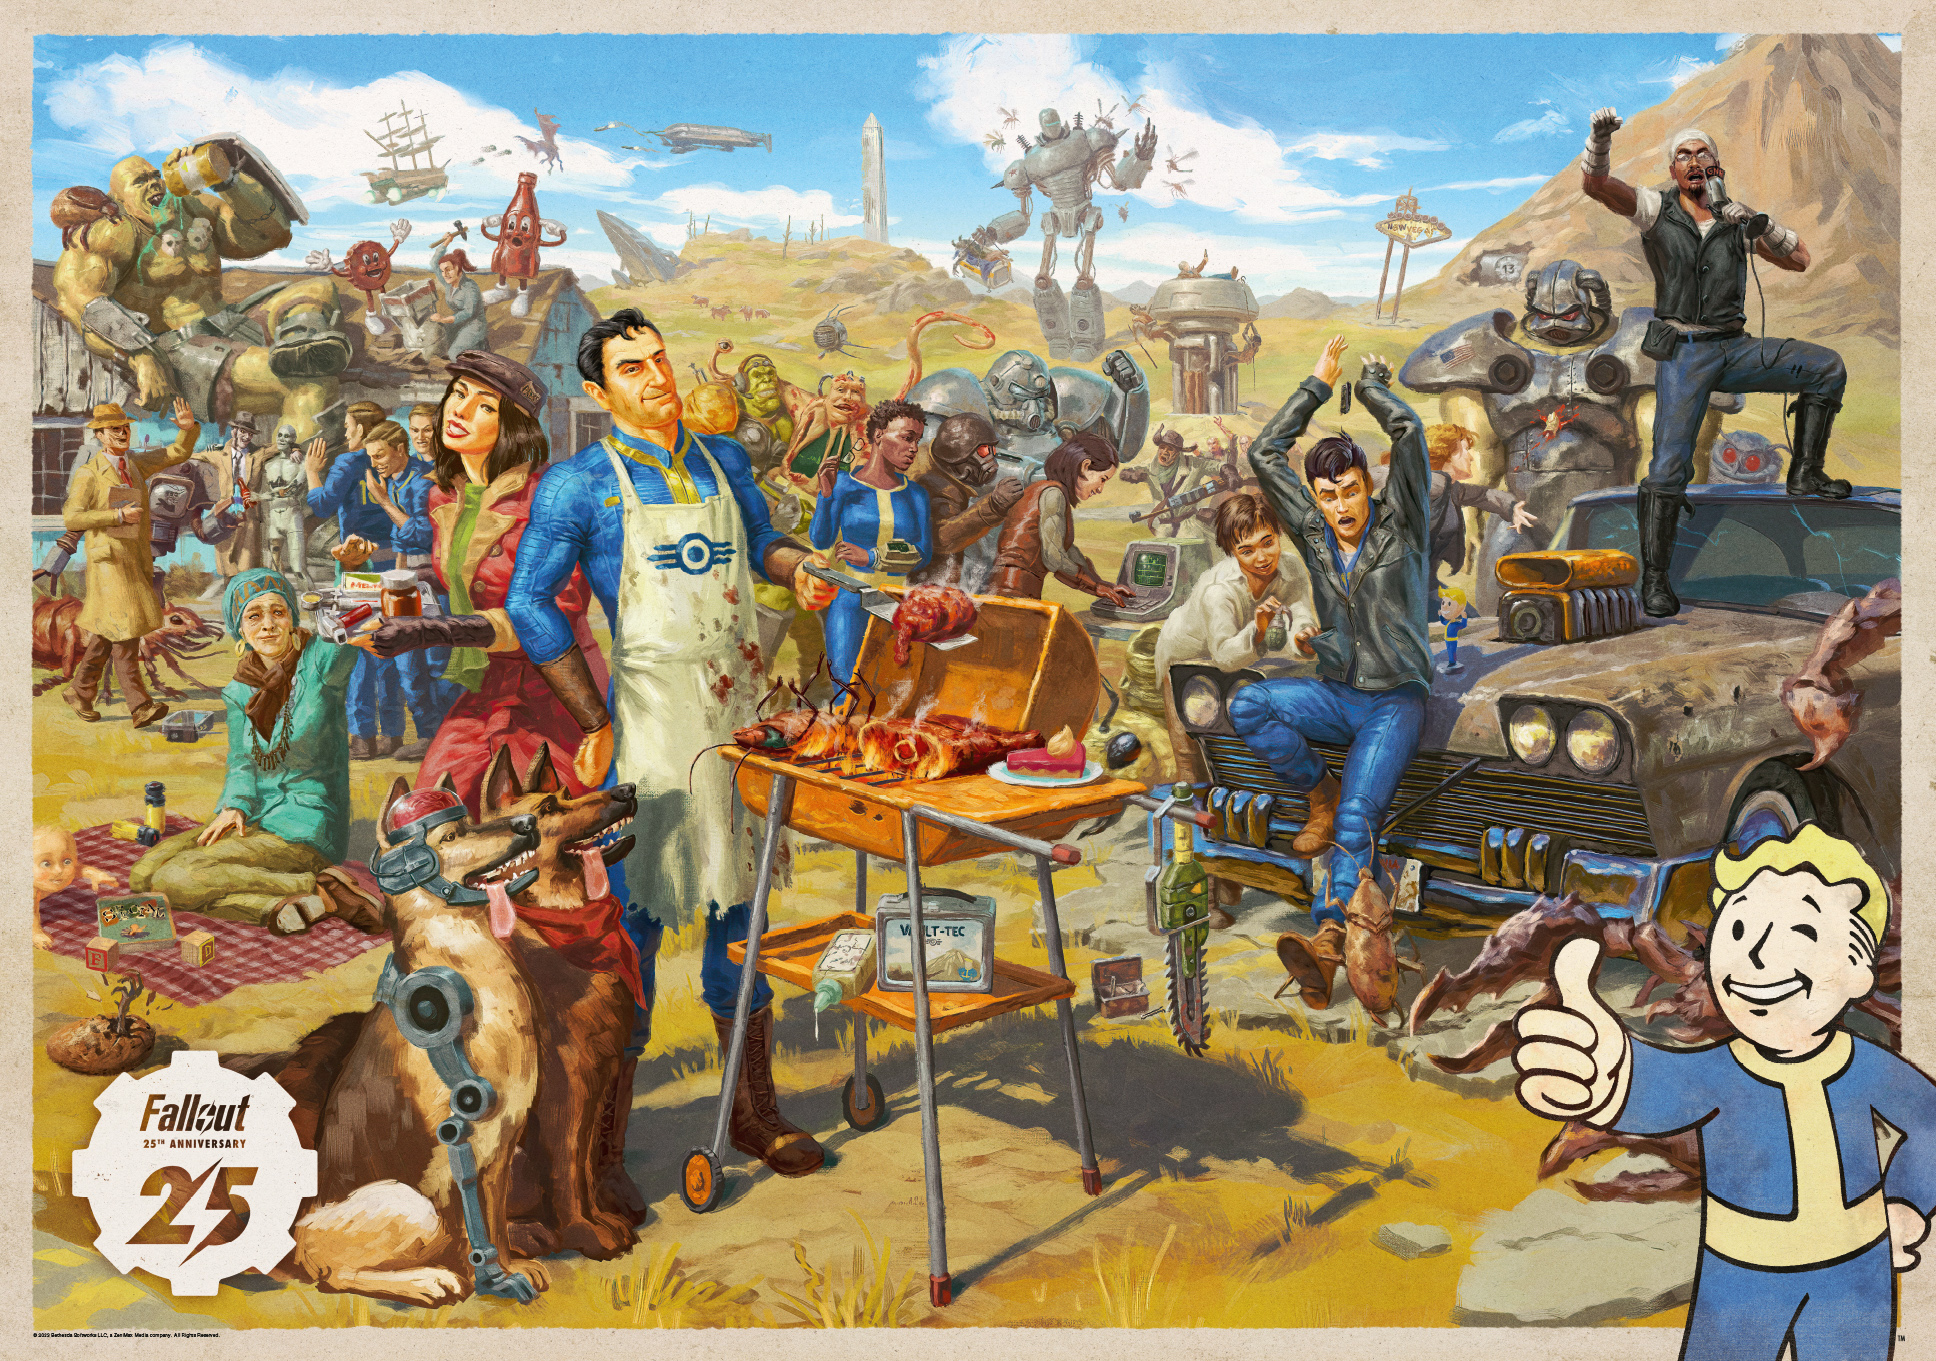 Puzzle - Fallout 25th Anniversary - 1000 Teile